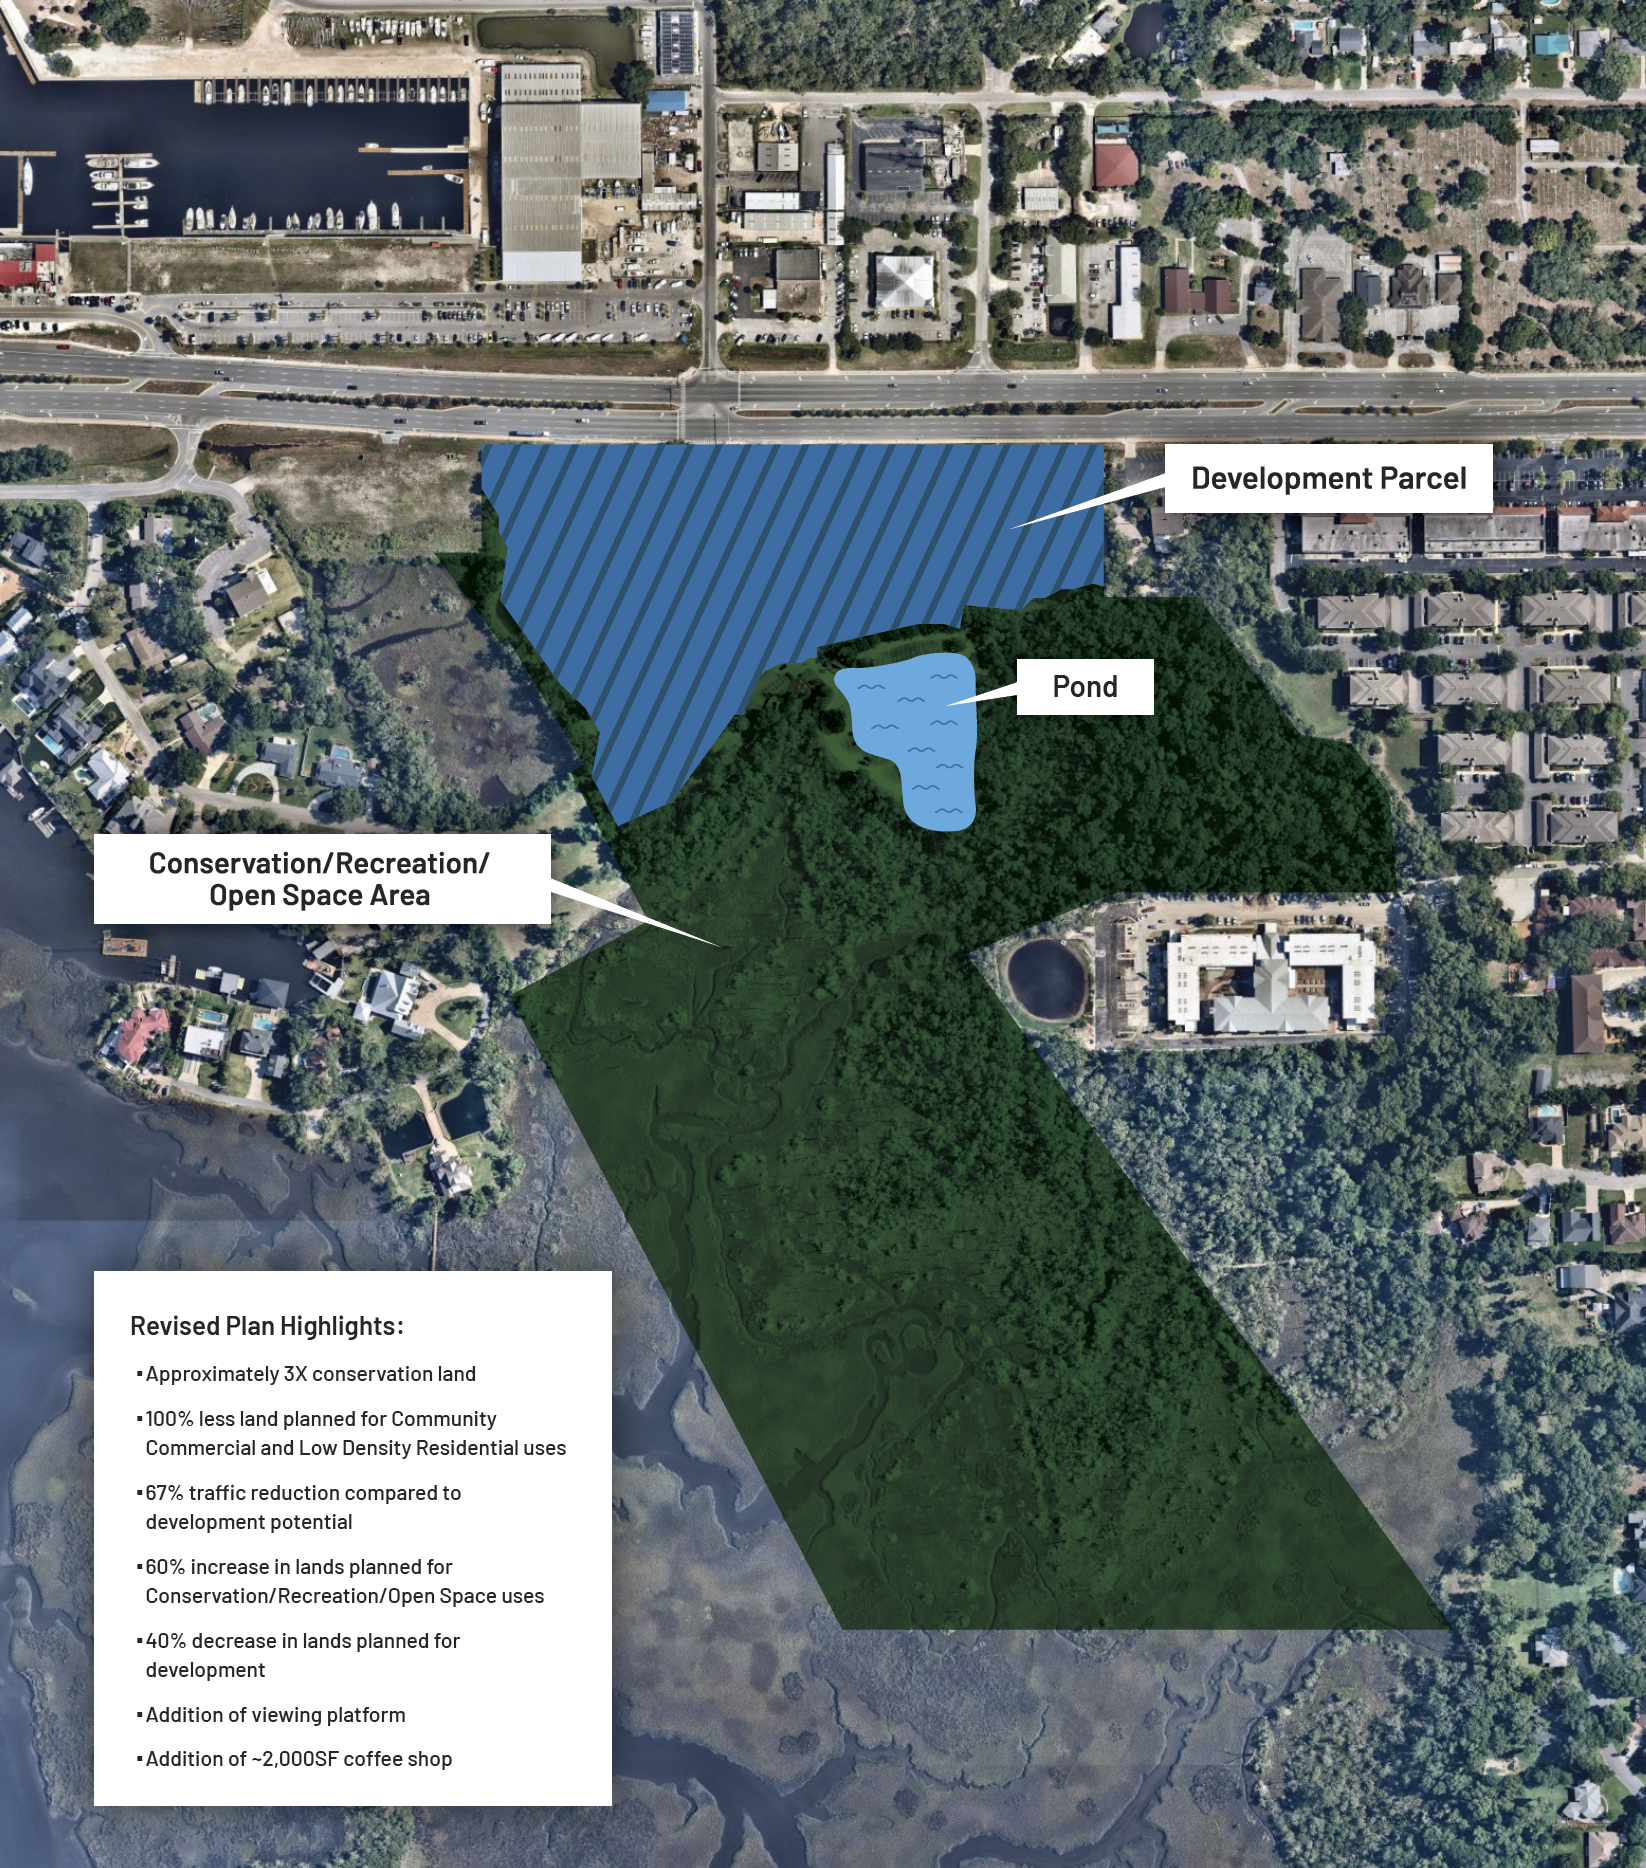 The Trevato project comprises 53.8 acres, but only 10.9 acres will be developed.